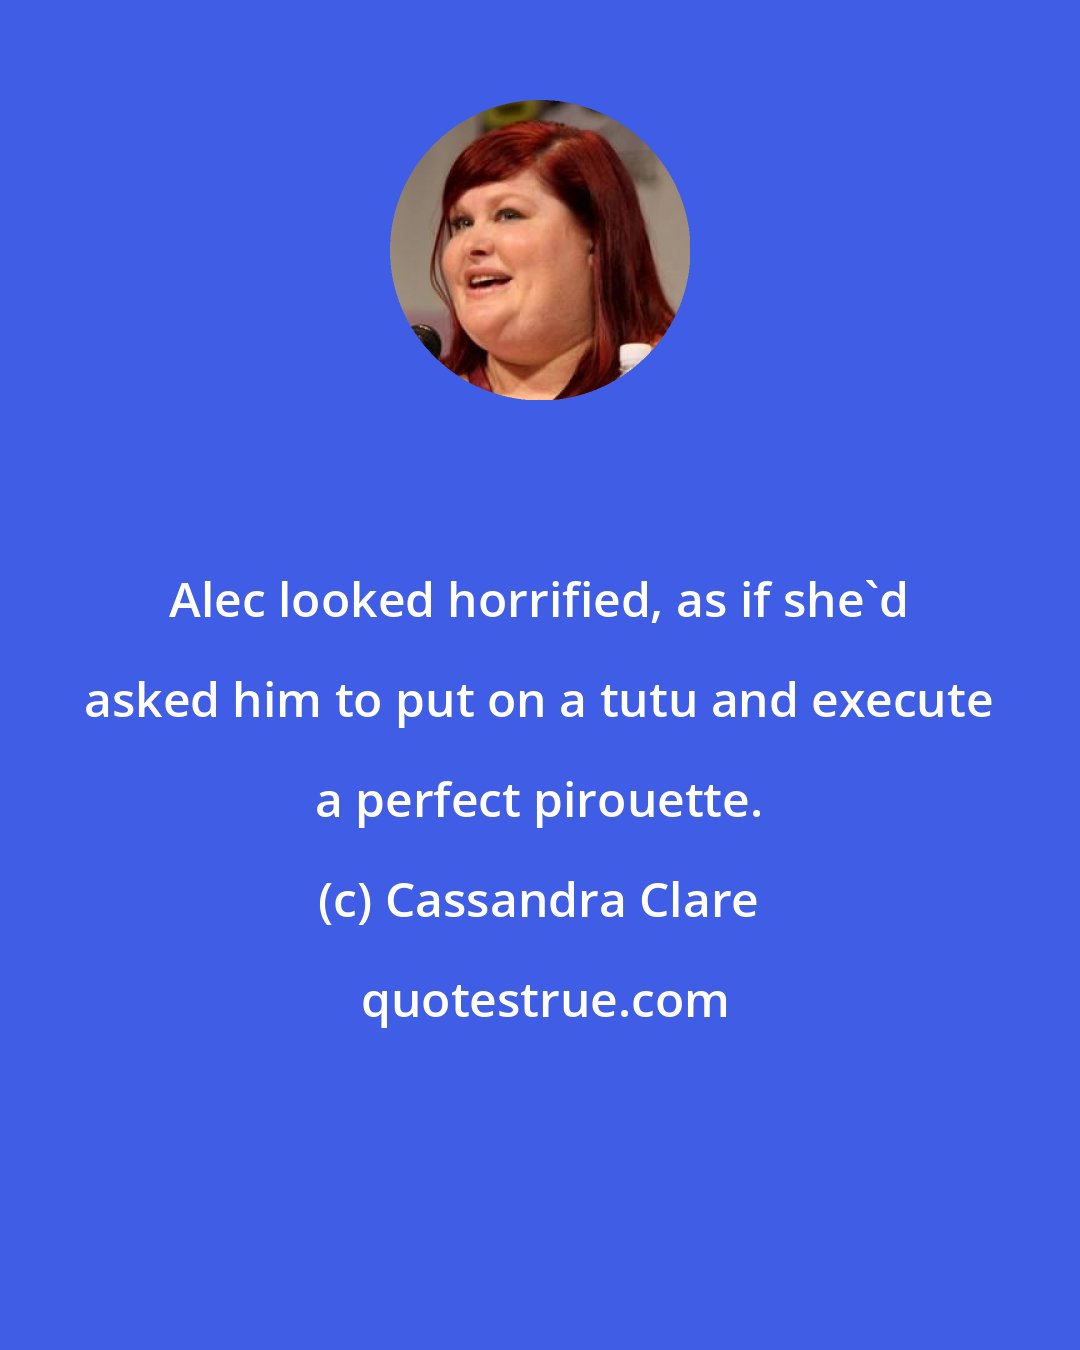 Cassandra Clare: Alec looked horrified, as if she'd asked him to put on a tutu and execute a perfect pirouette.